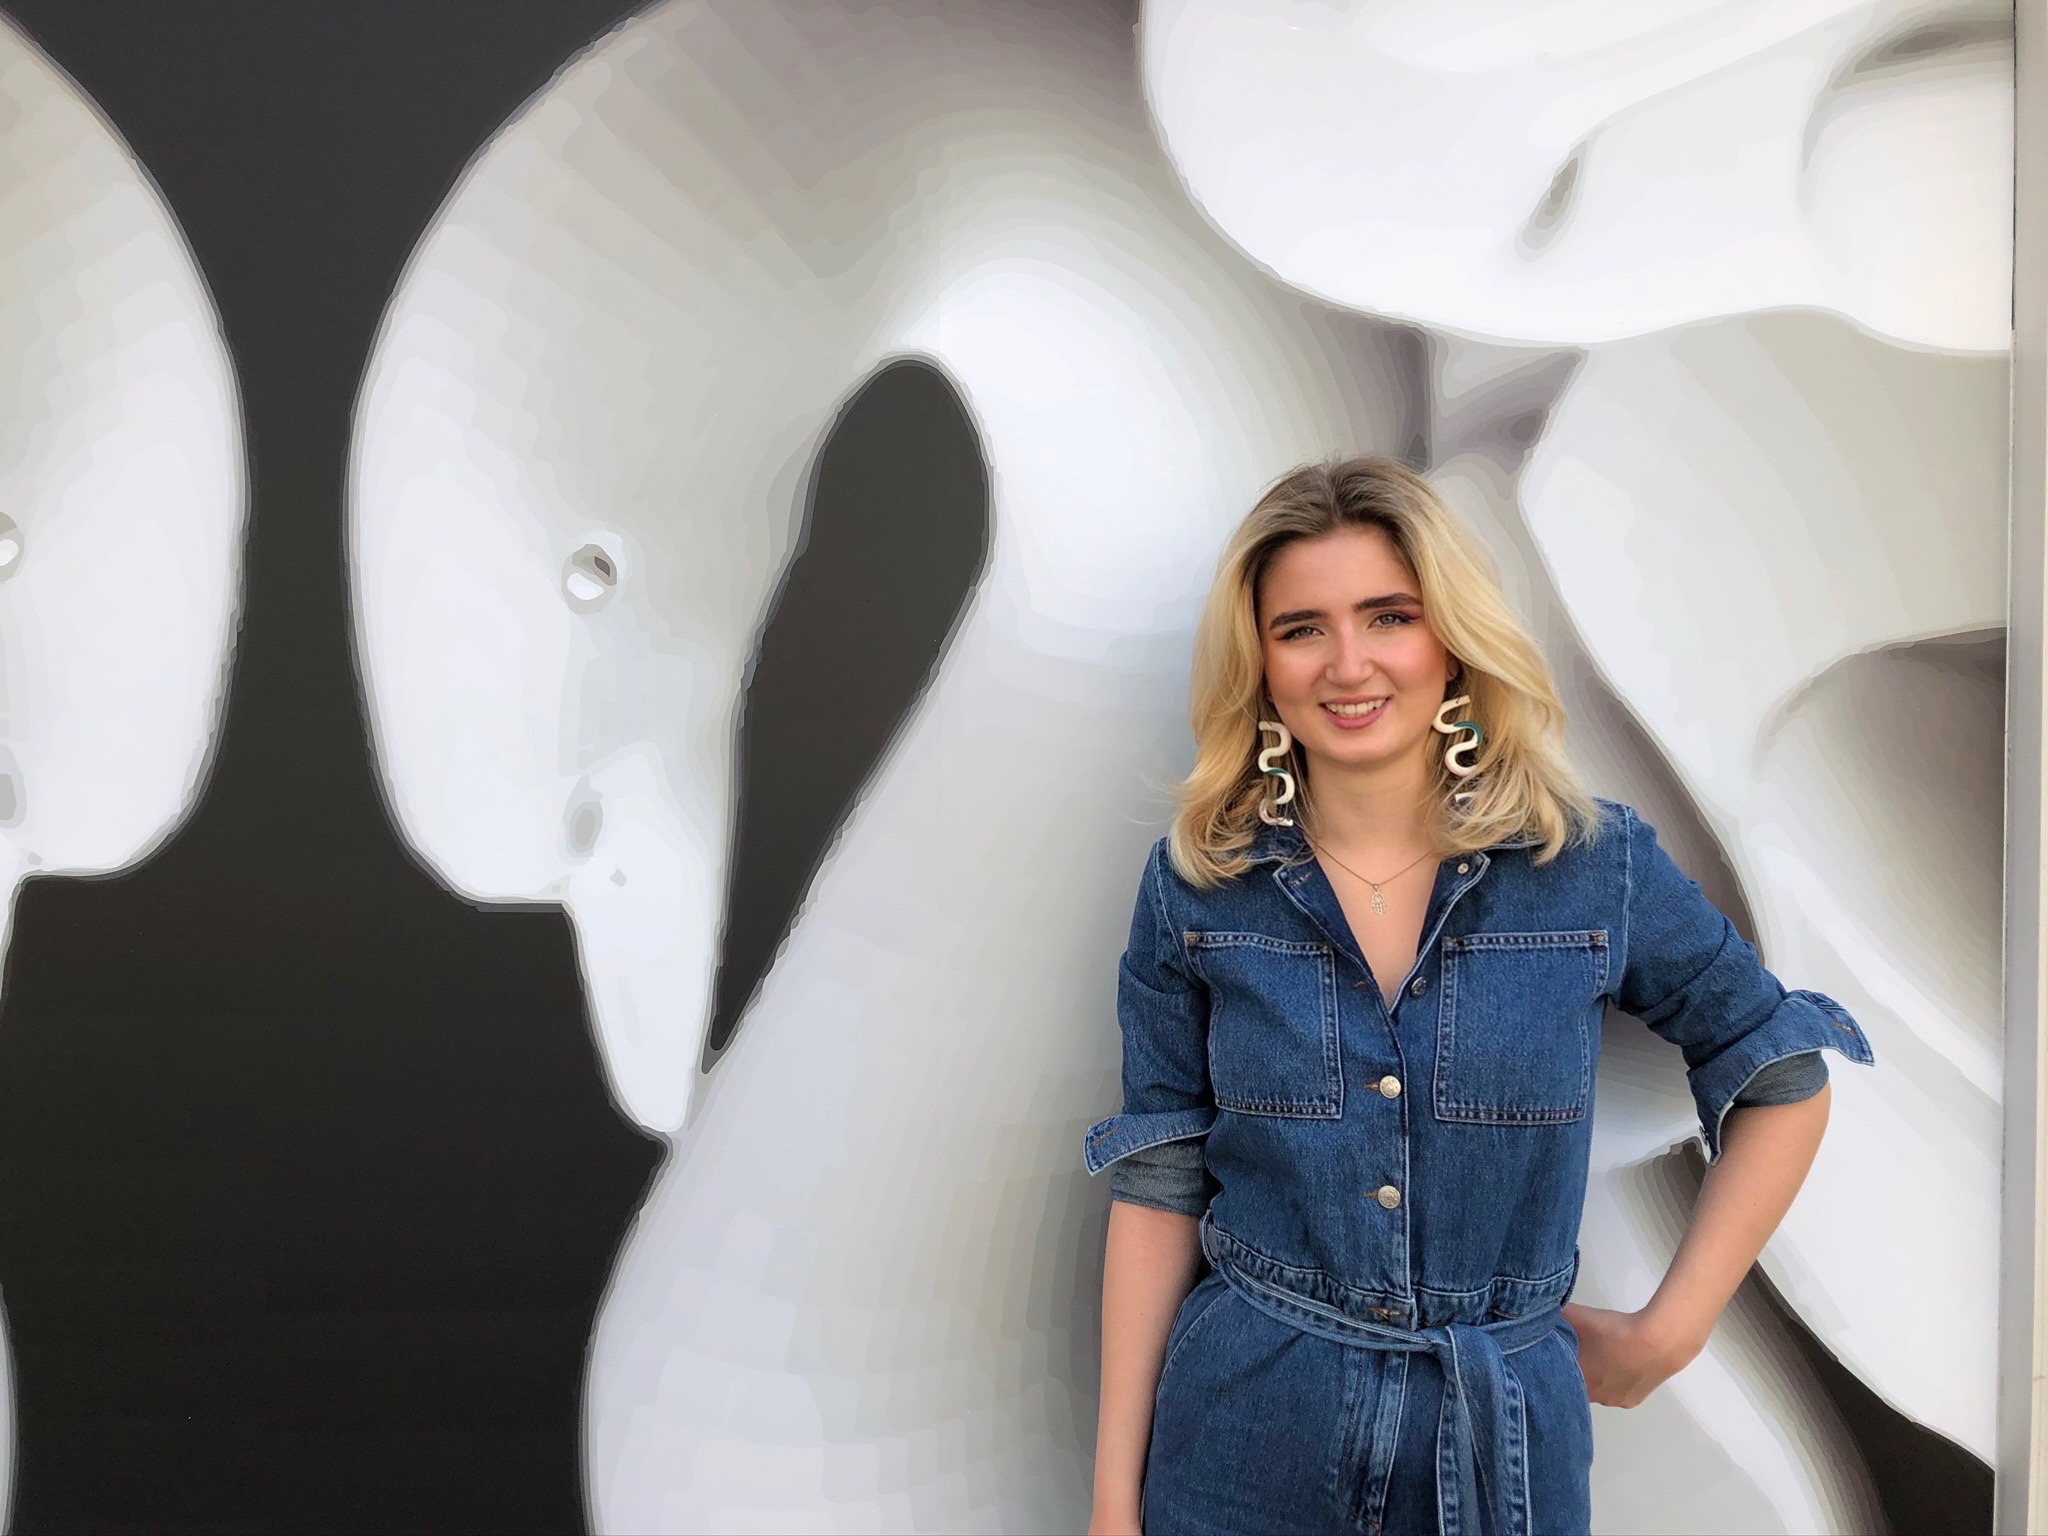 Person with blonde hair and denim dress standing in front of swam artwork